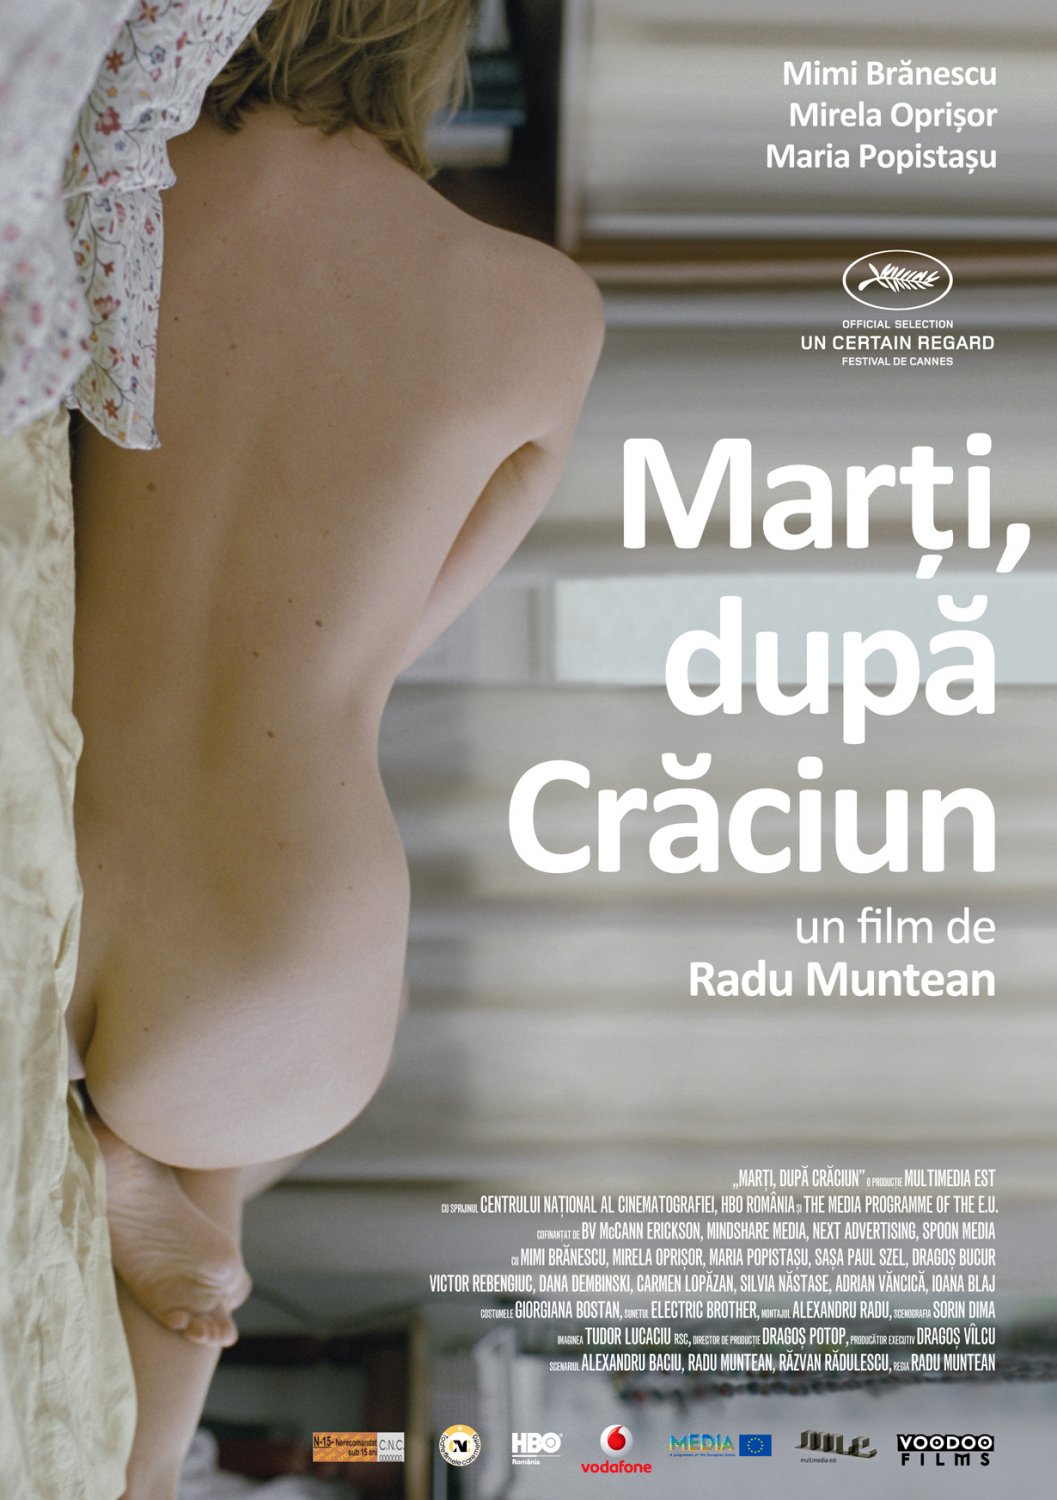 Extra Large Movie Poster Image for Marti, dupa craciun 